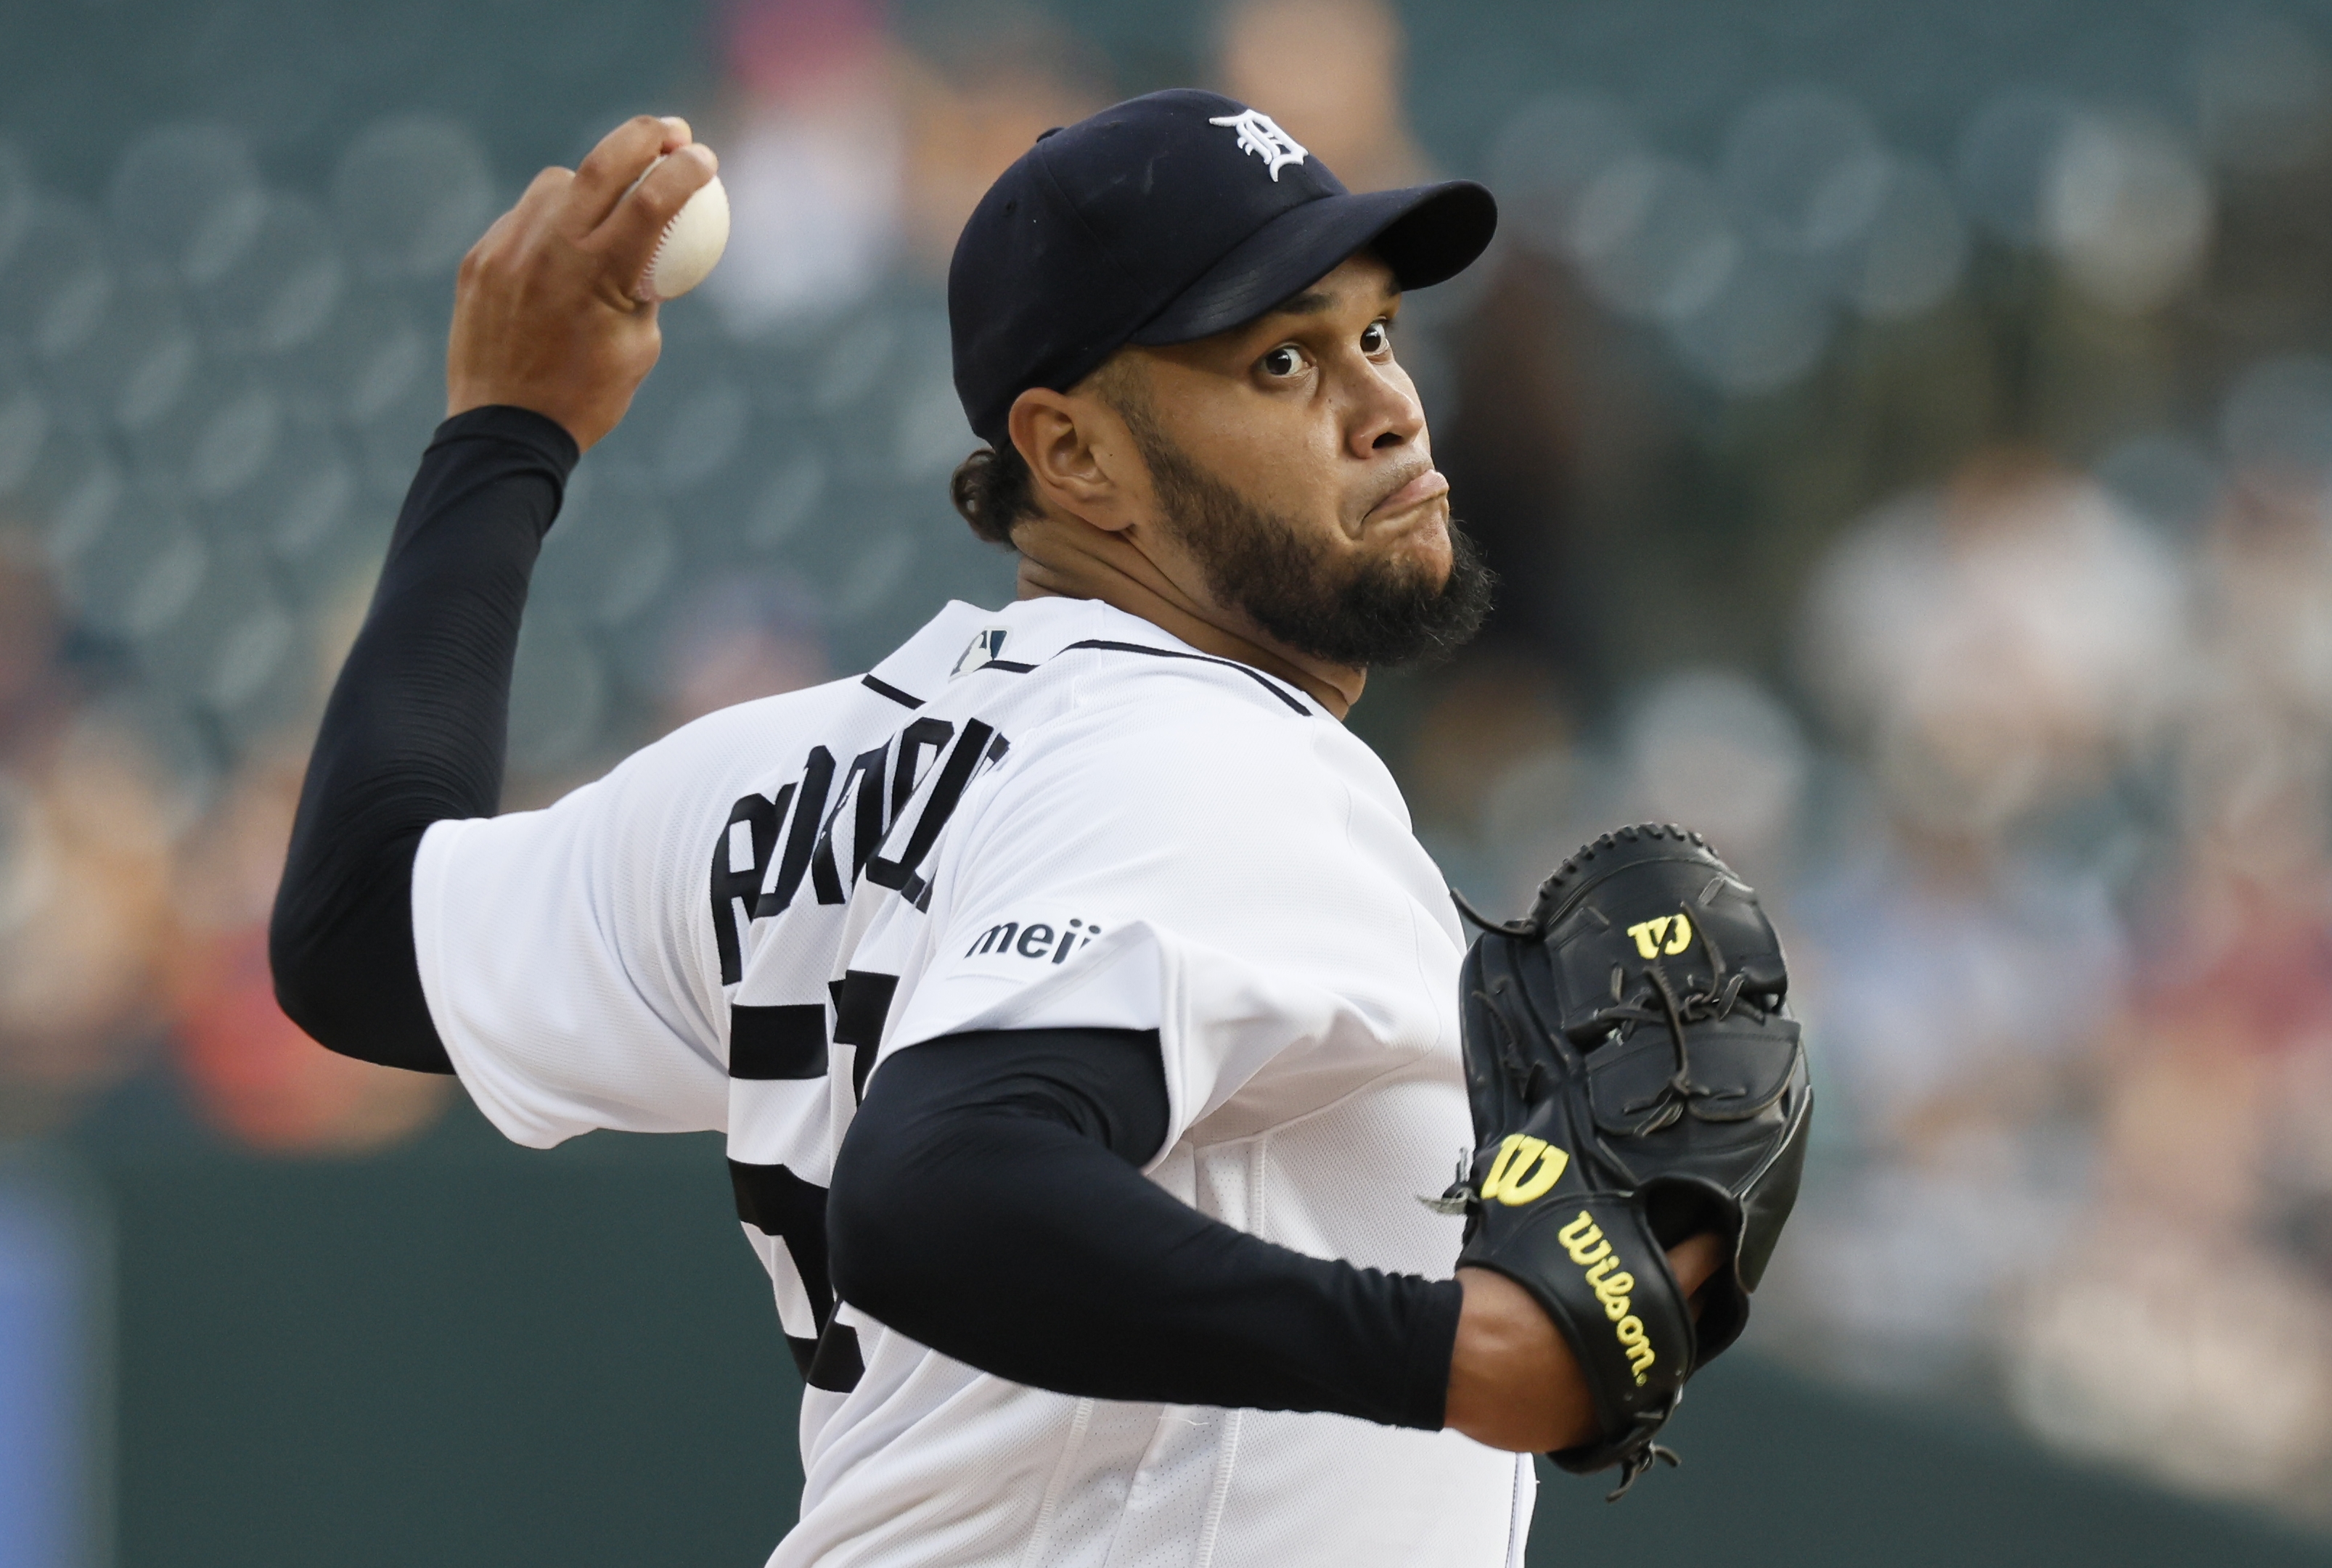 Happy New Year? It's 'back to the old me' for White Sox pitcher